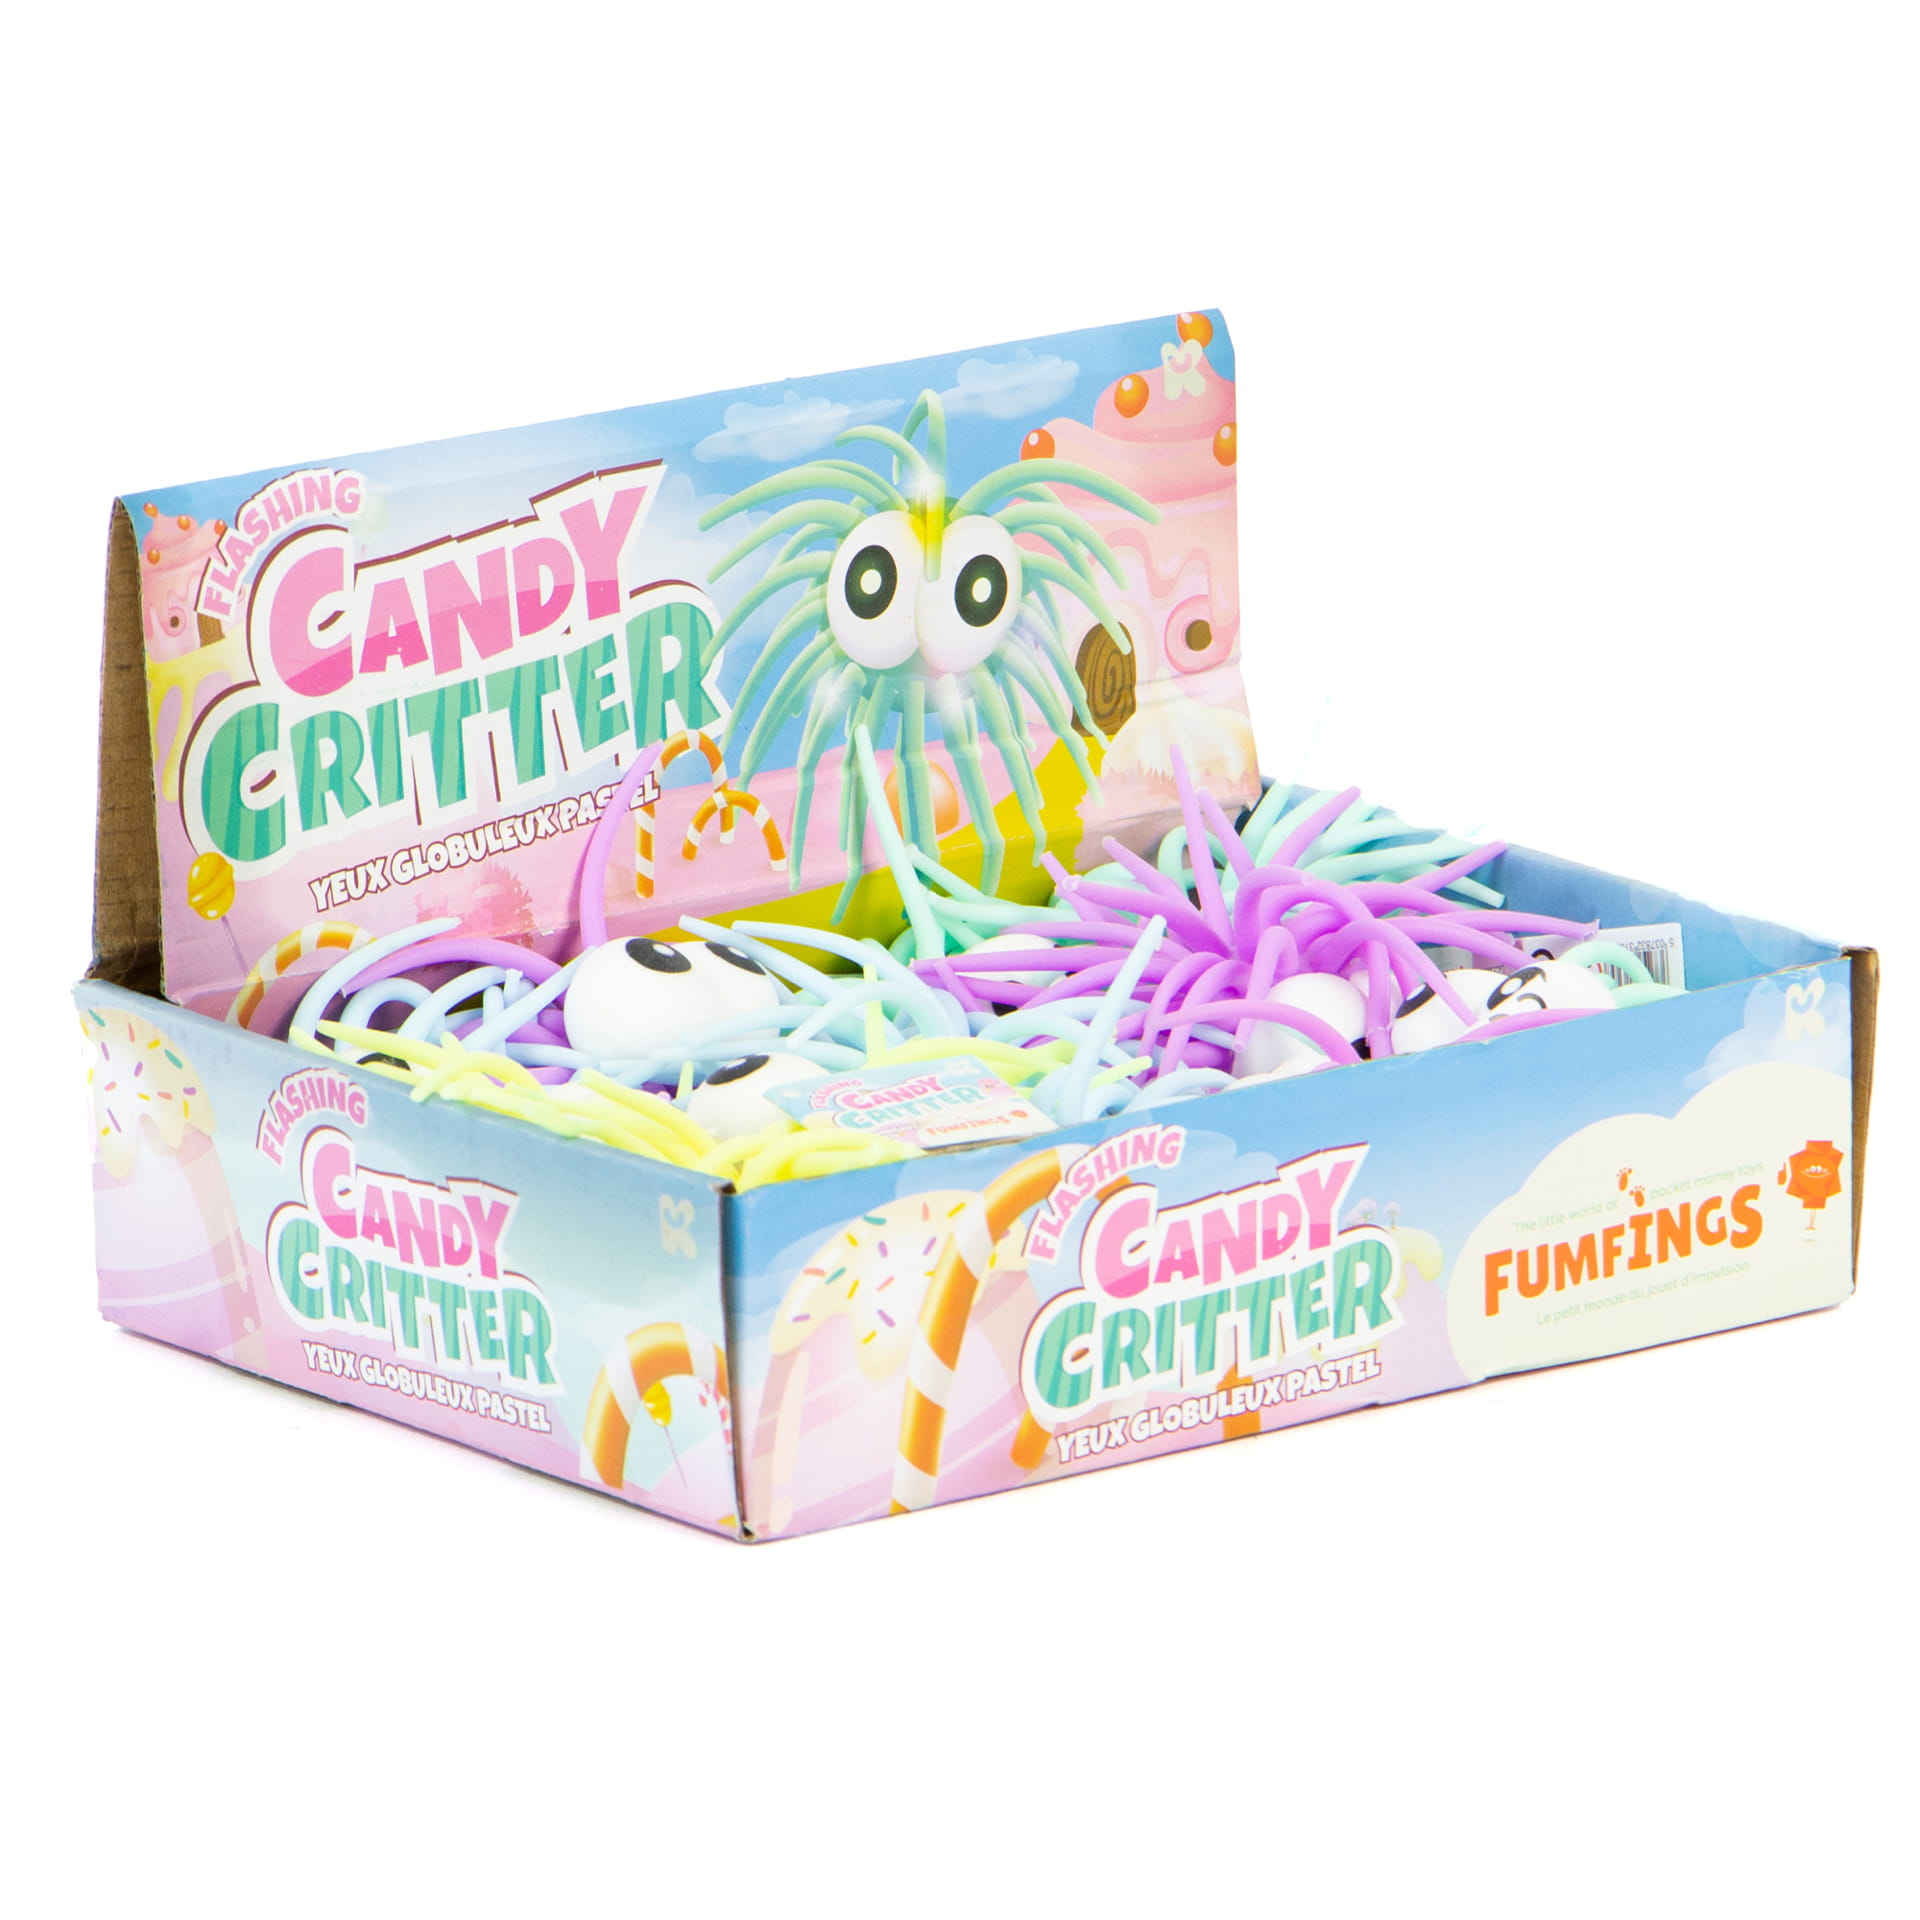 Fumfings Flashing Candy Critters